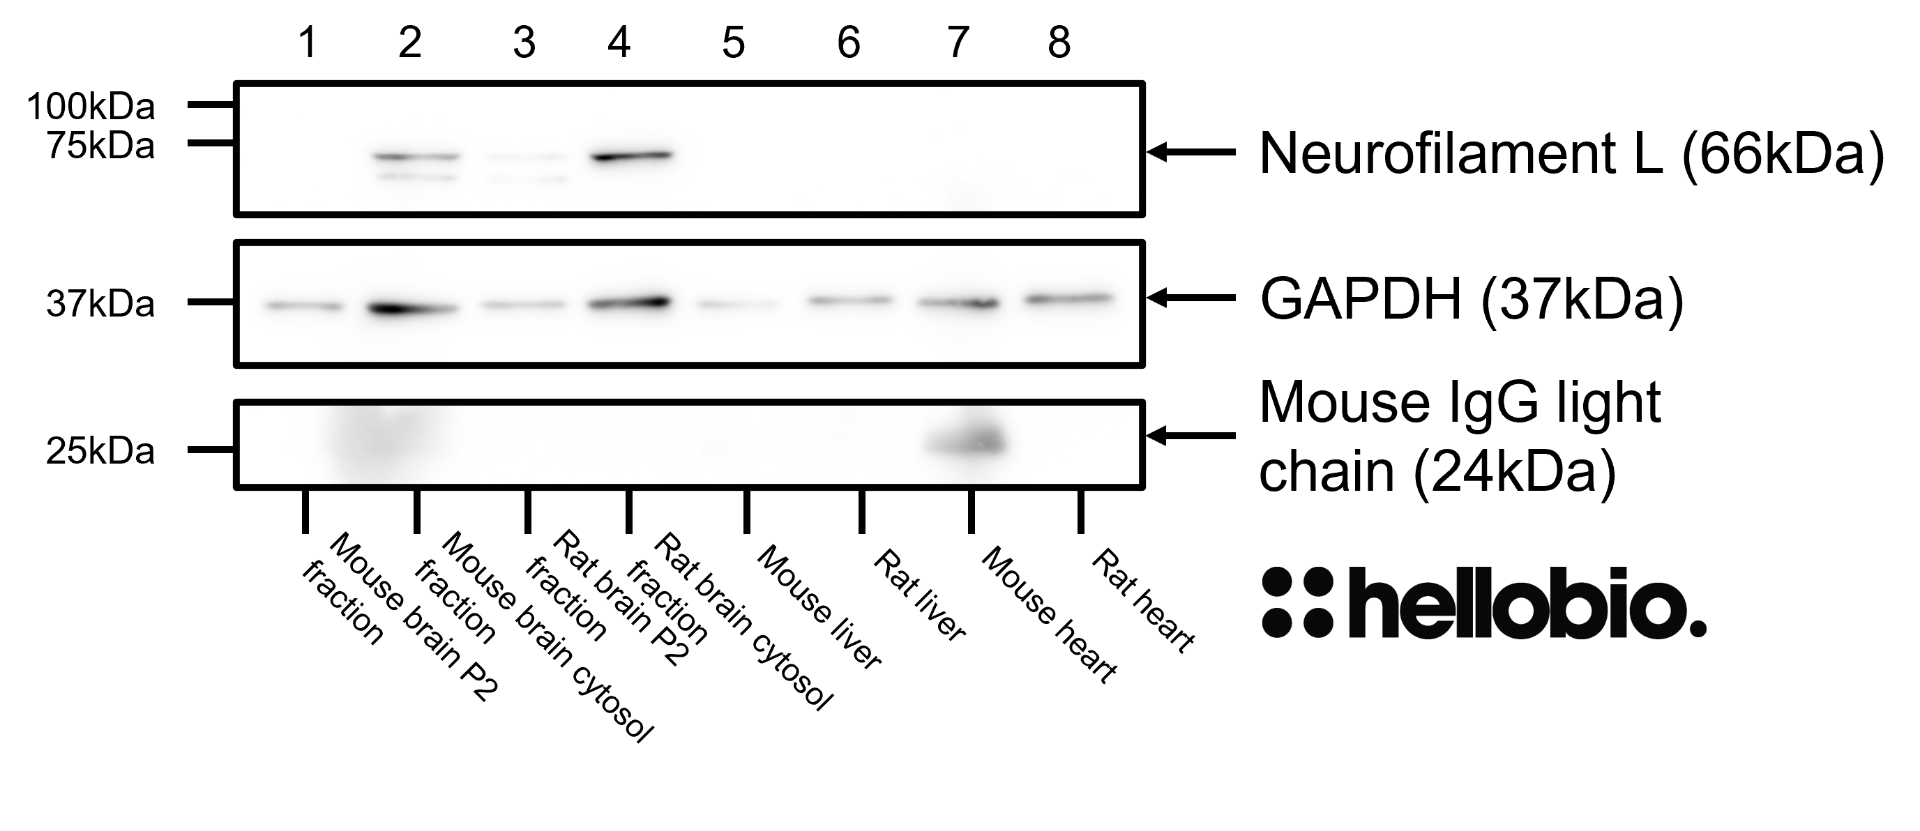 Figure 6. Neurofilament L and GAPDH expression in various tissue lysates and preparations. 